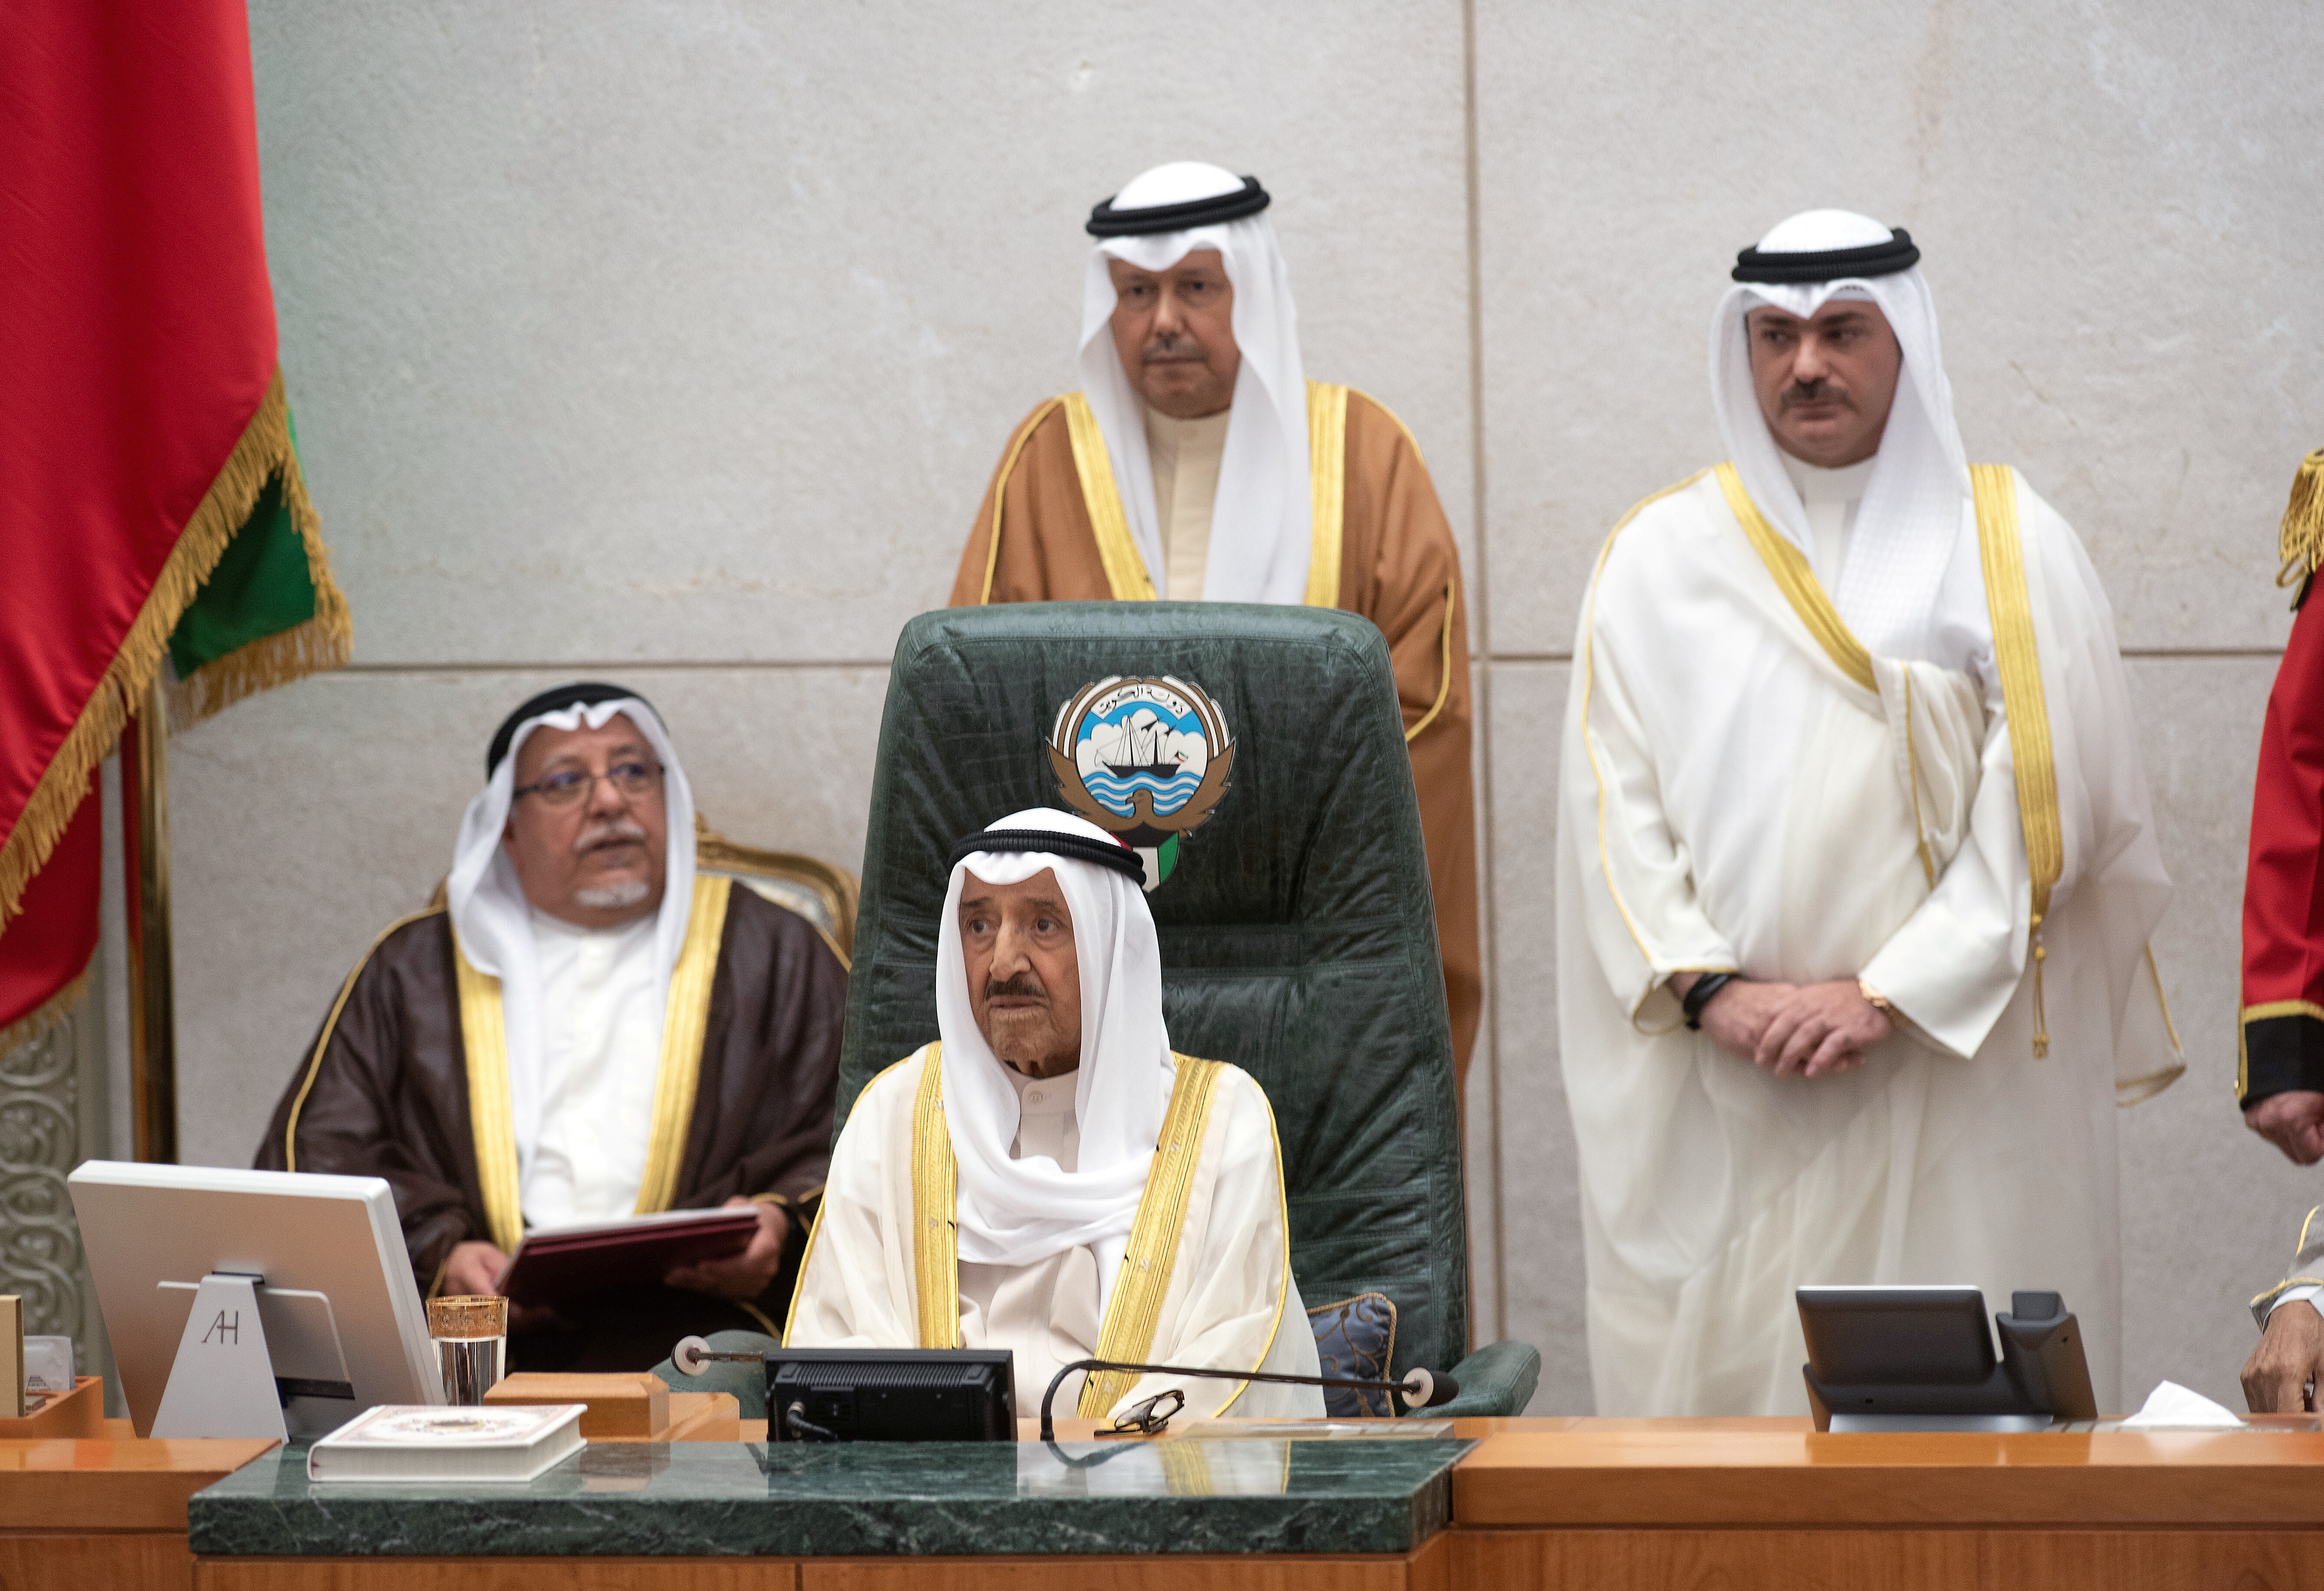 Kuwait’s Emir Sheikh Sabah al-Ahmad al-Sabah sits during opening of parliament session in Kuwait City in 2019. Photo: Reuters